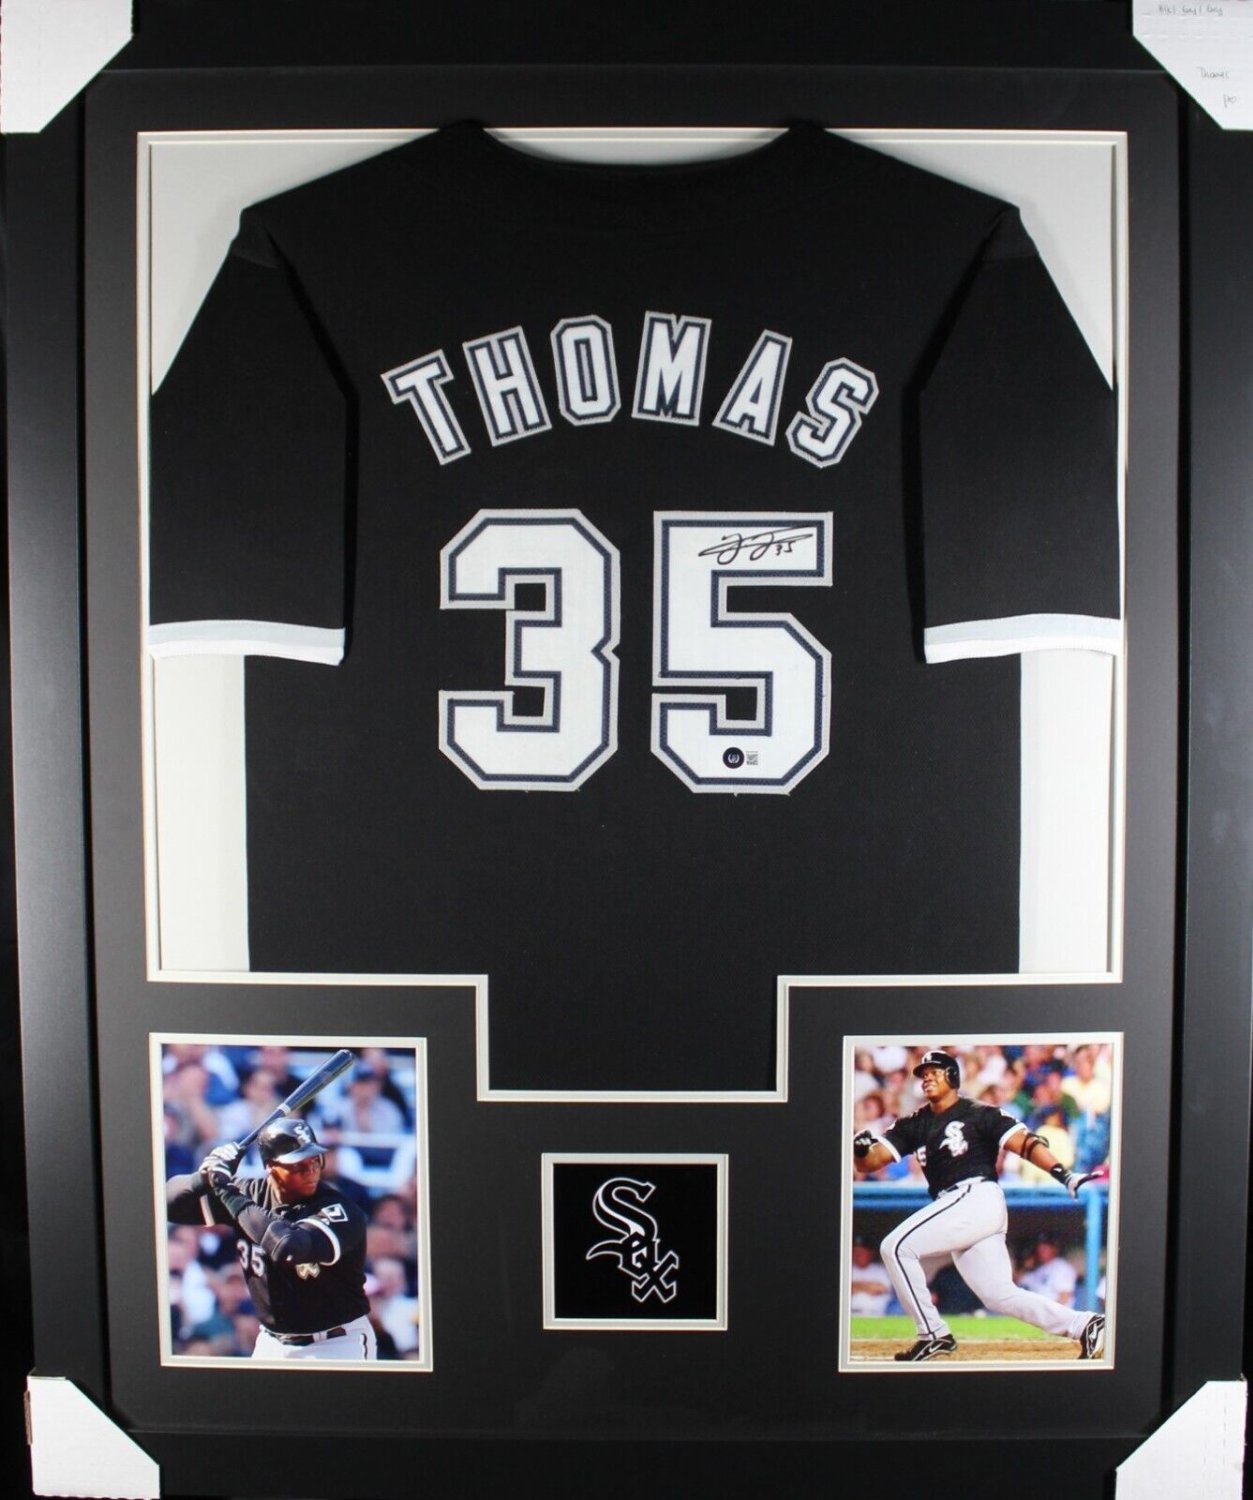 Frank Thomas Autographed Signed (White Sox Black Tower) Framed